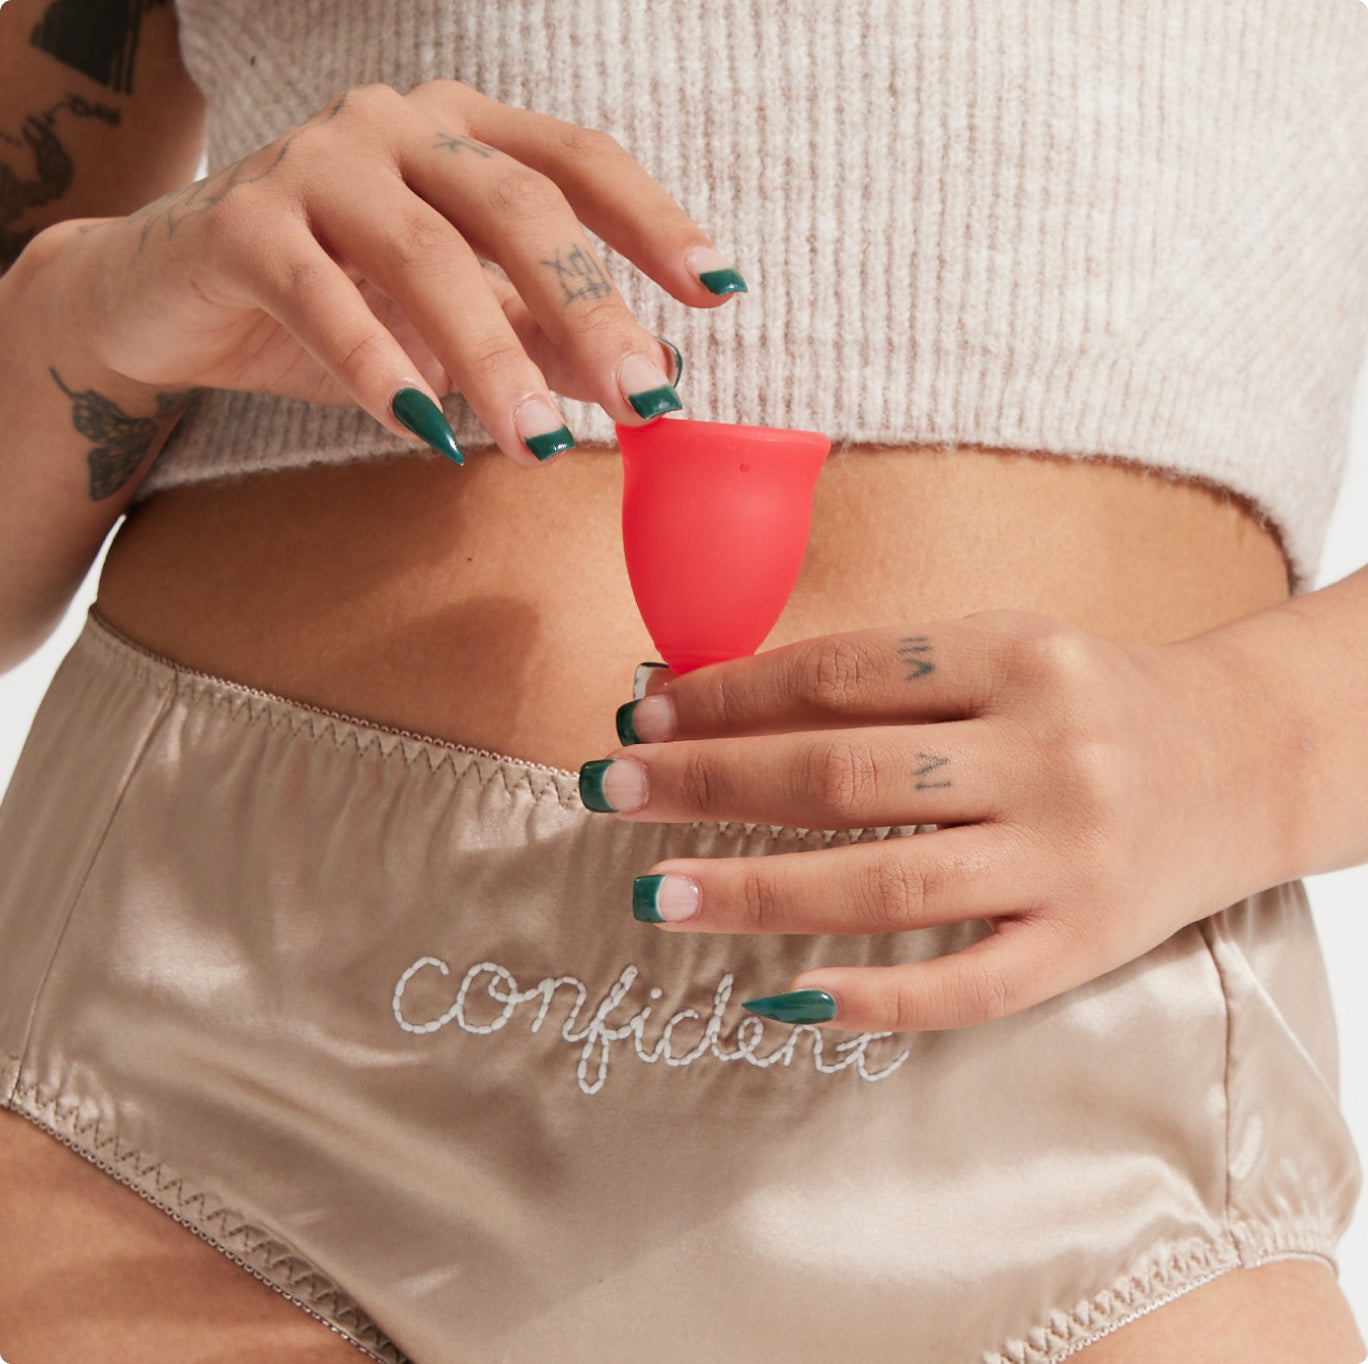  Pixie Cup Menstrual Cup - Includes Ebook Guide, Cleaning Wipes,  Lube, & Storage Bag - Number 1 for Most Active Reusable Period Cup - Tampon  and Pad Alternative - Buy One